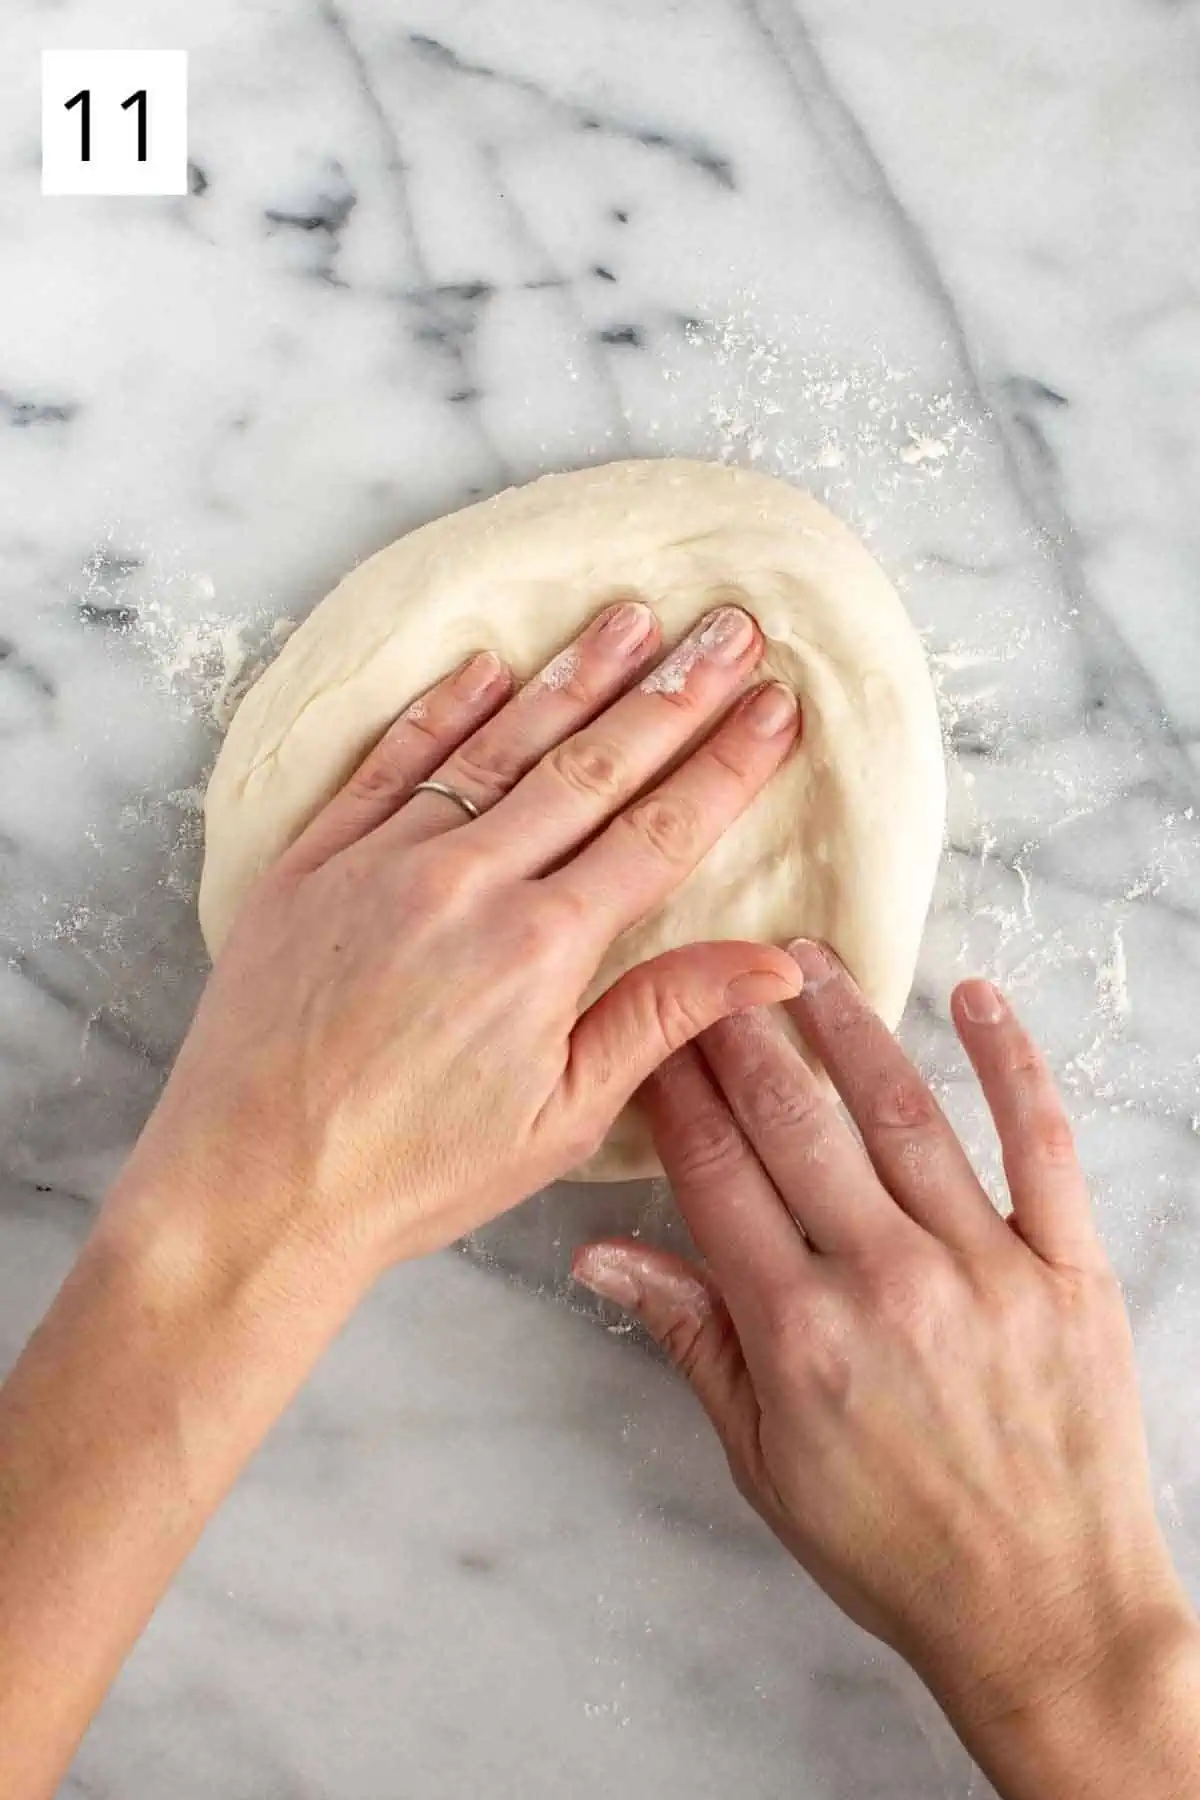 Stretching pizza dough by hand.